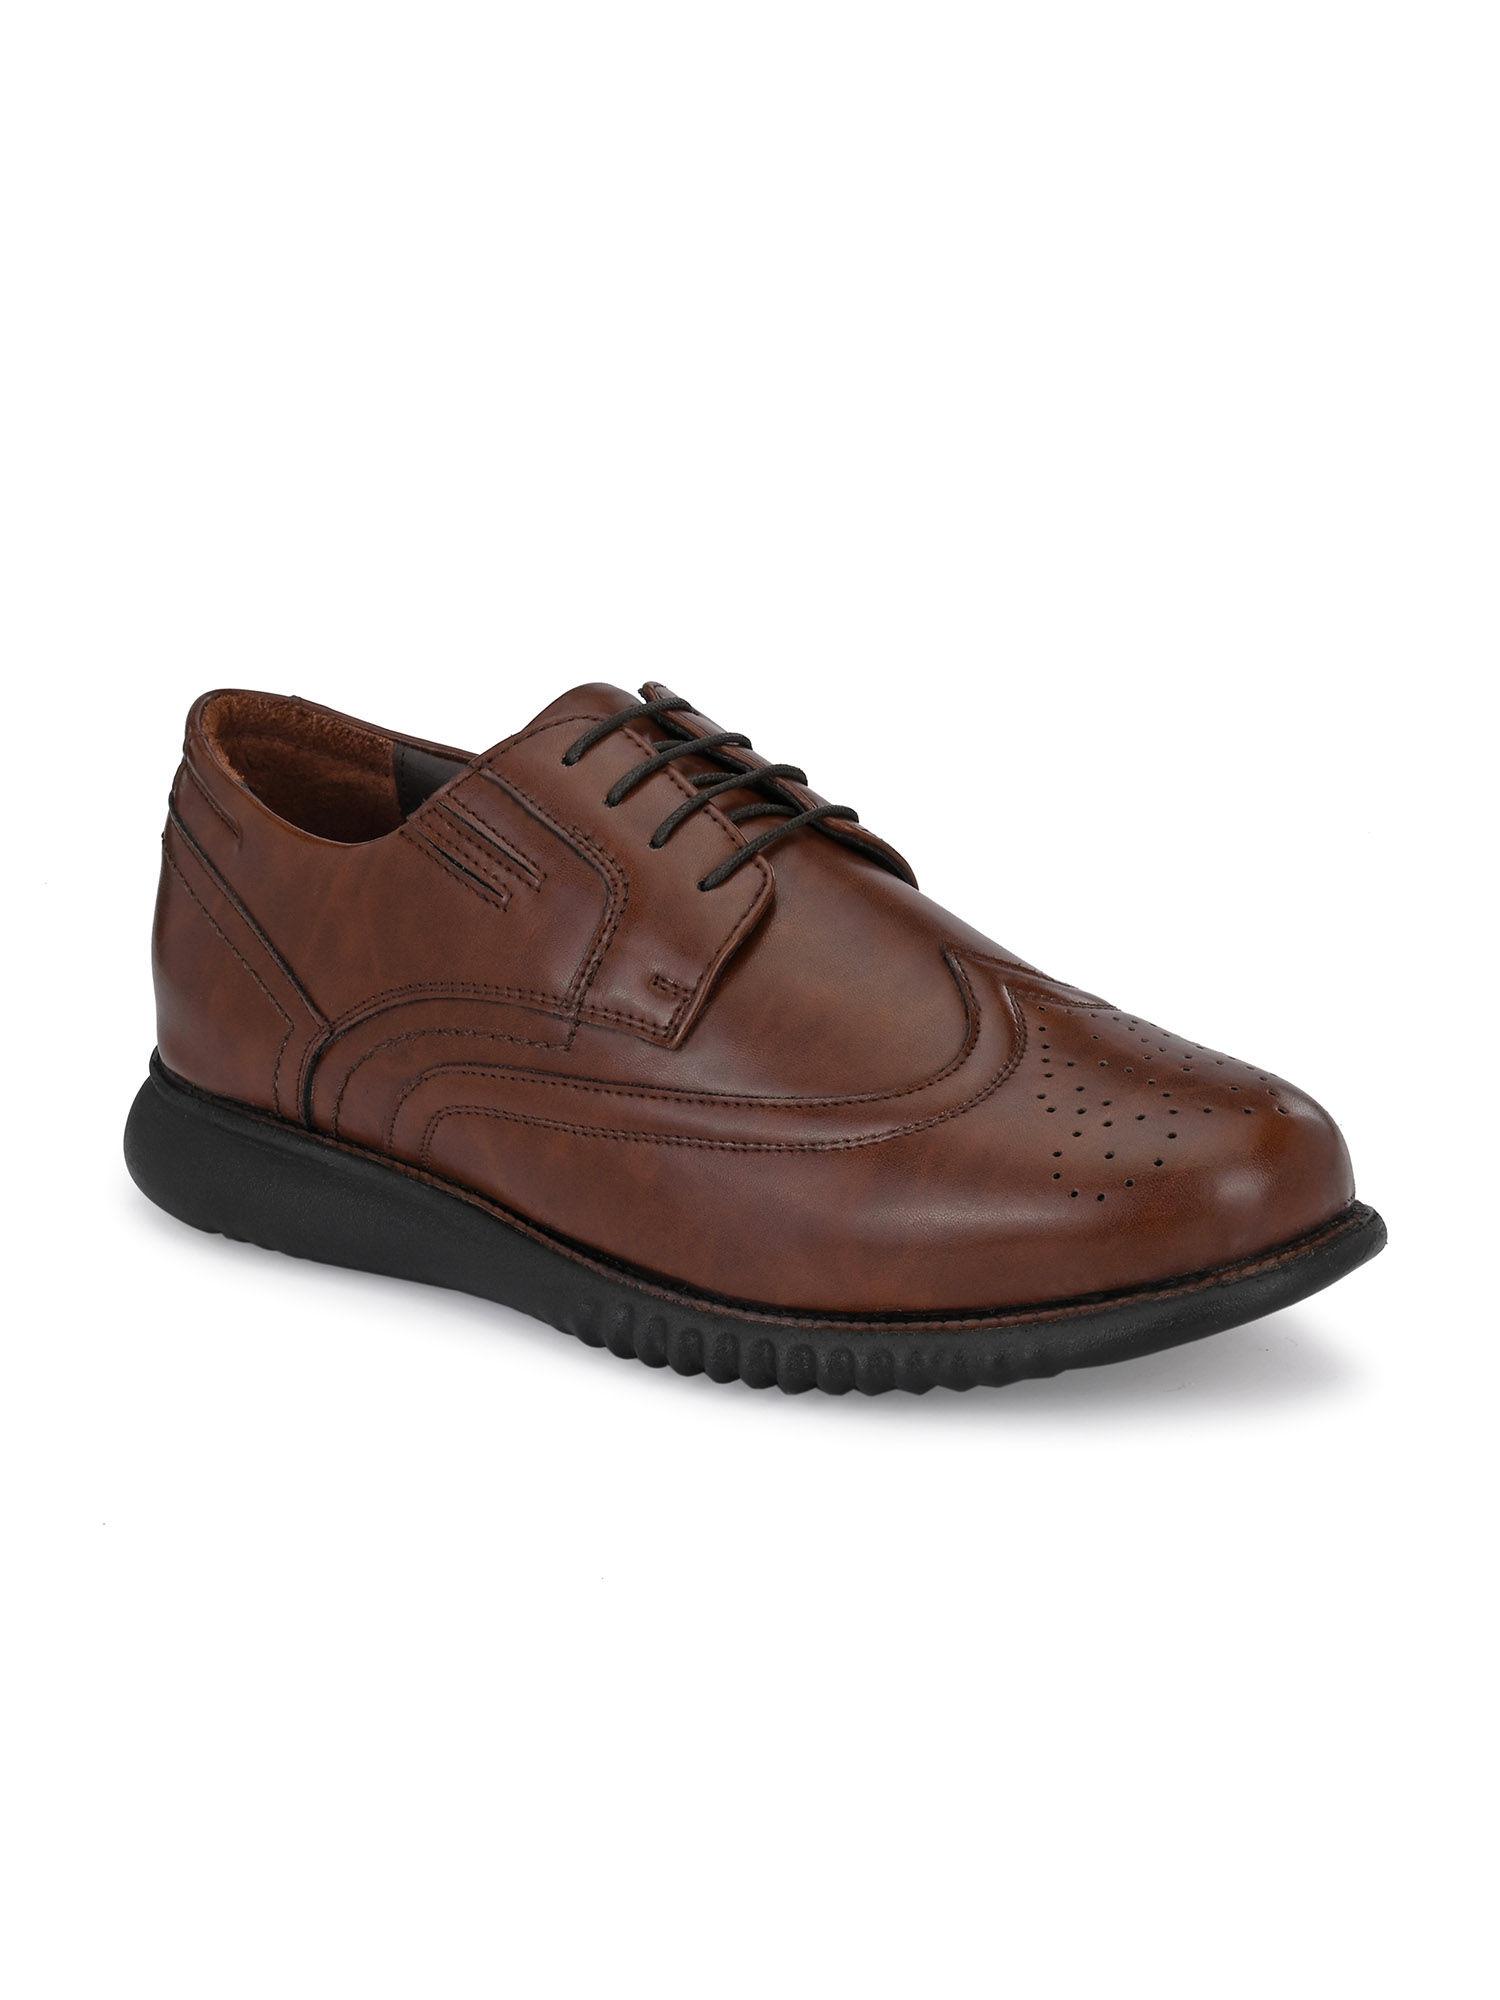 men's brown synthetic lace-up casual shoes